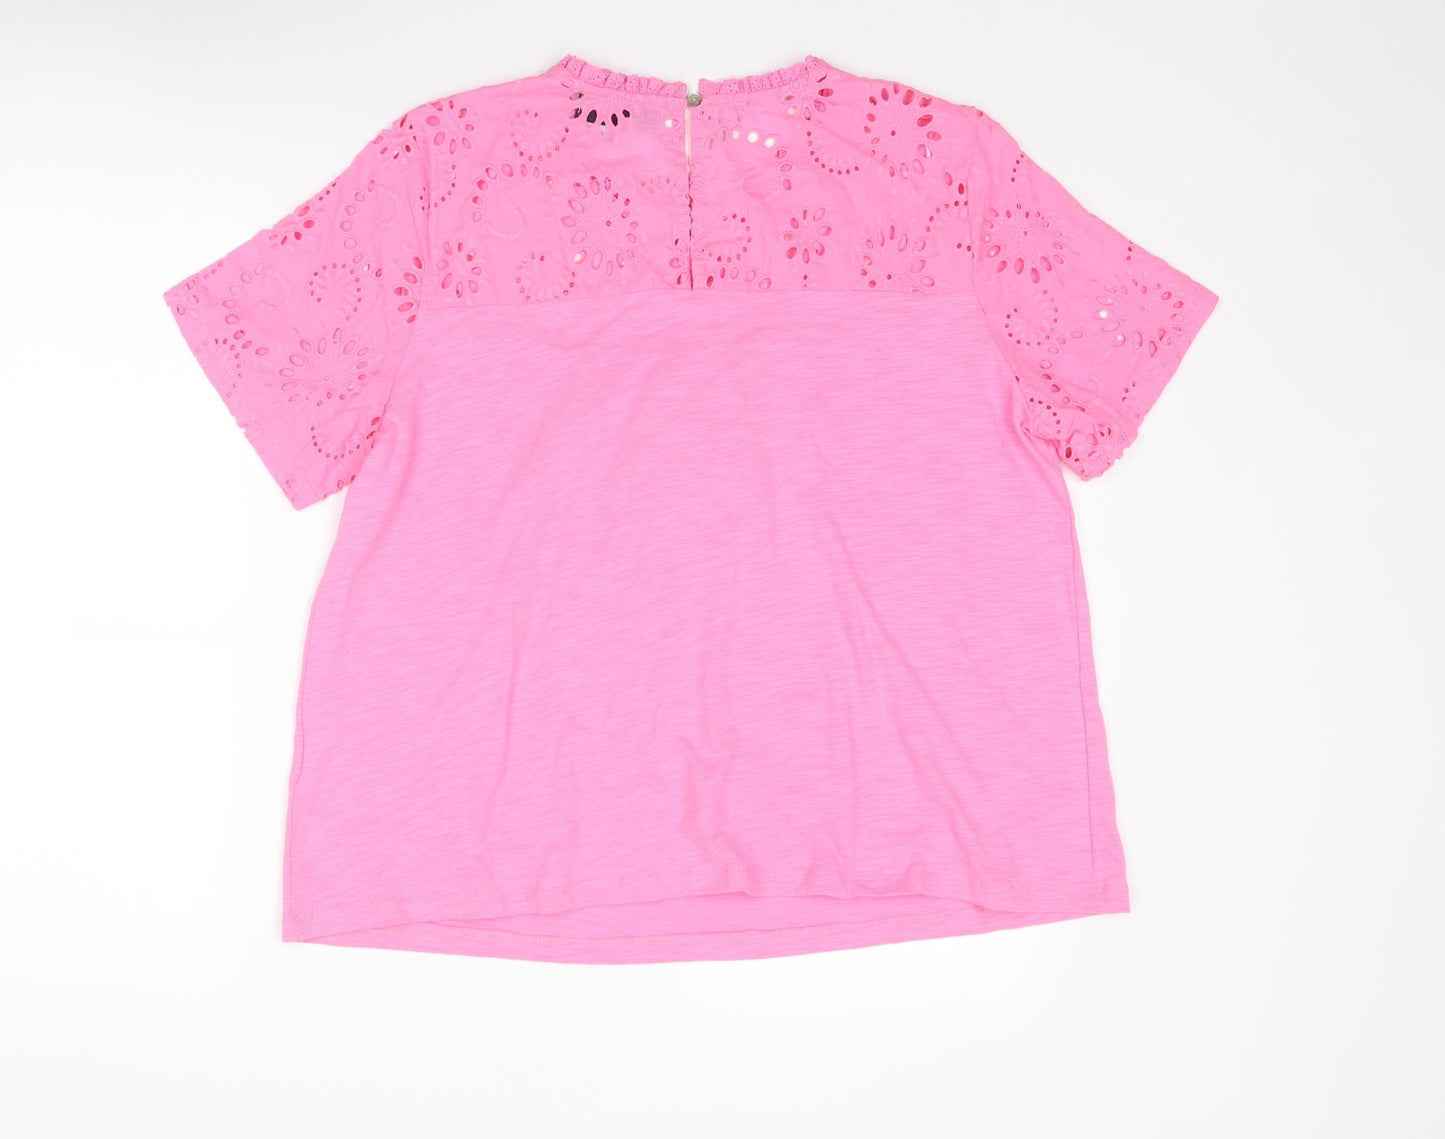 Hepburn Womens Pink Cotton Basic Blouse Size XL Round Neck - Broderie Anglaise